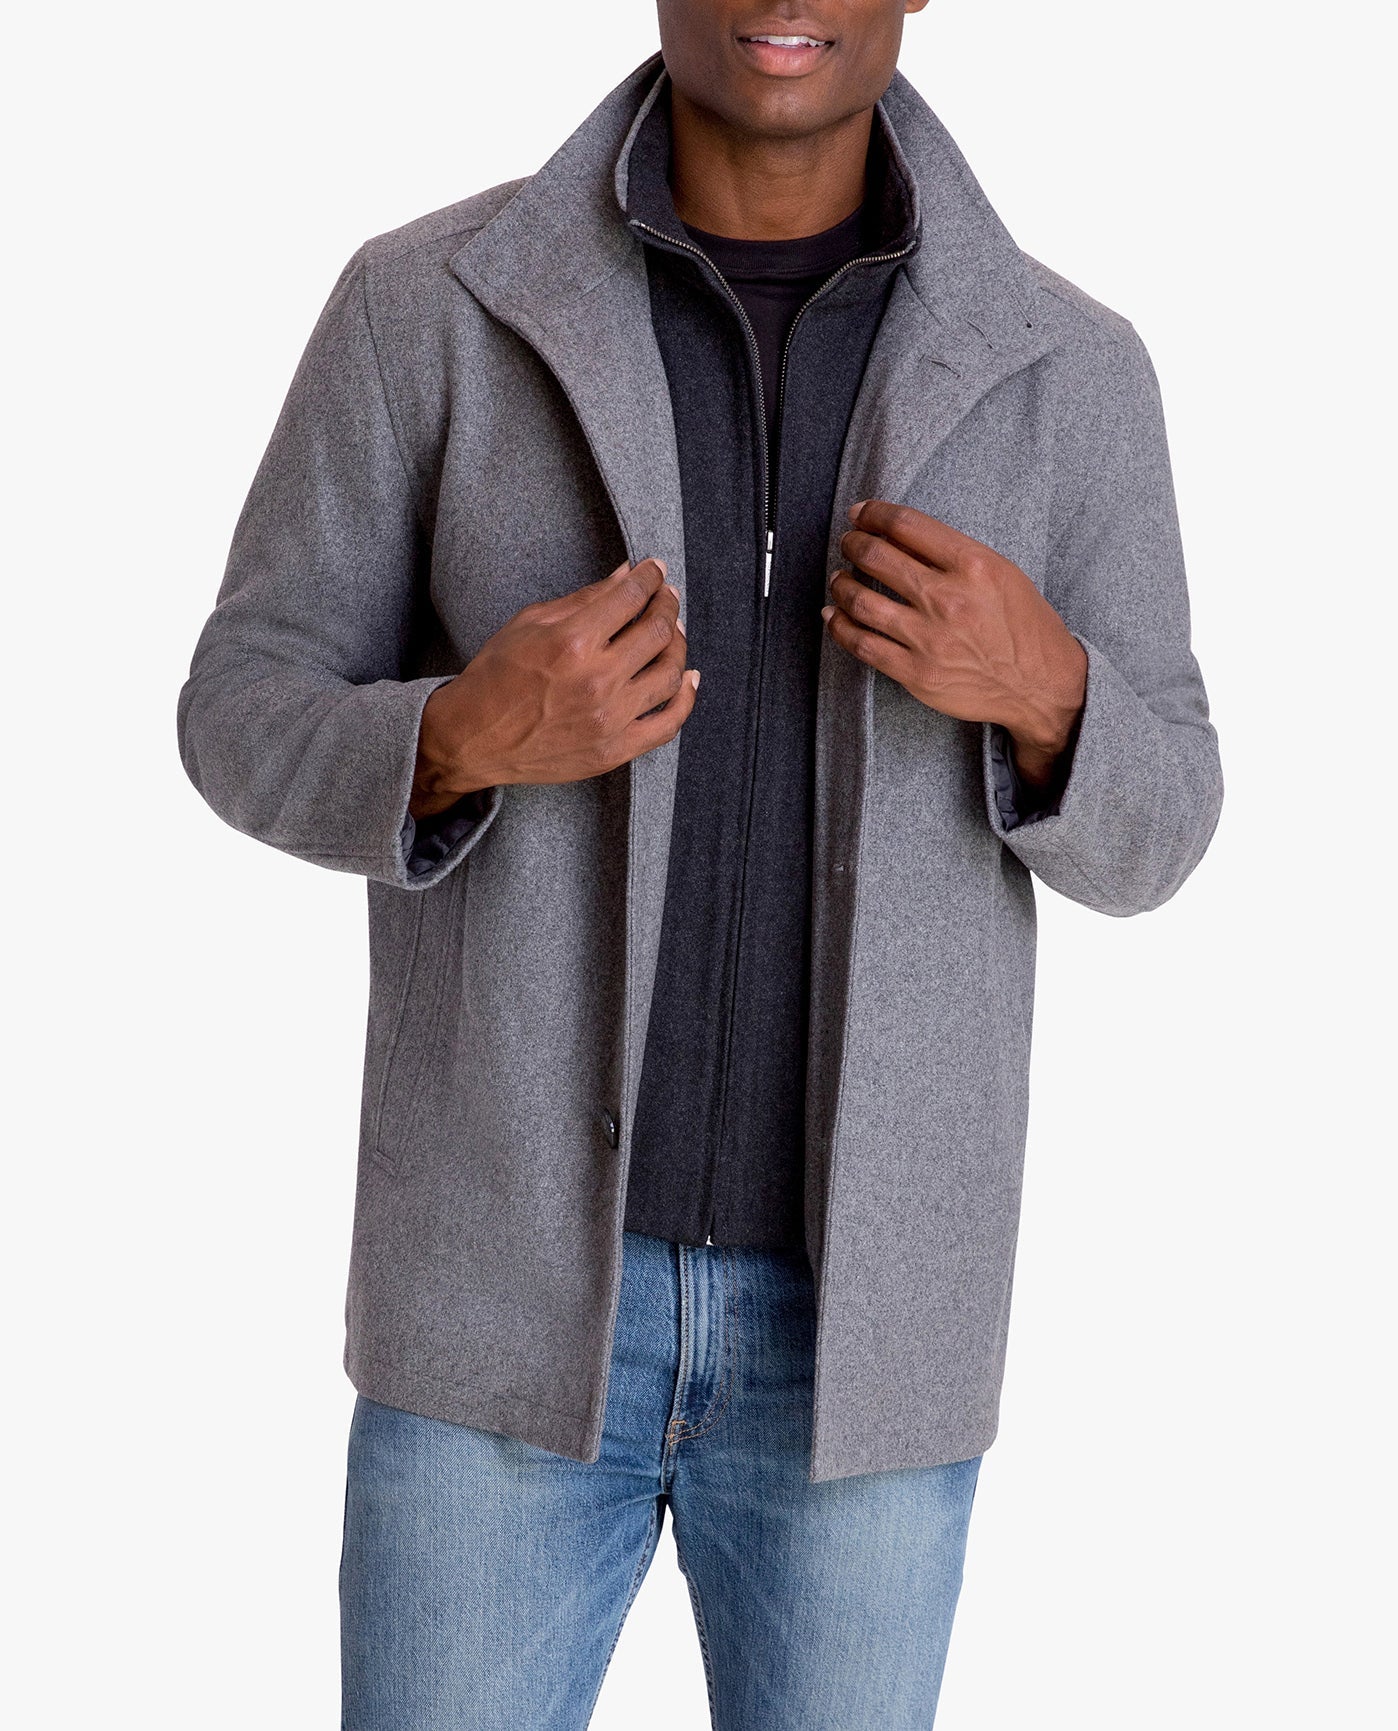 SIDE VIEW OF AMHERST BUTTON FRONT WOOL JACKET | MEDIUM GREY